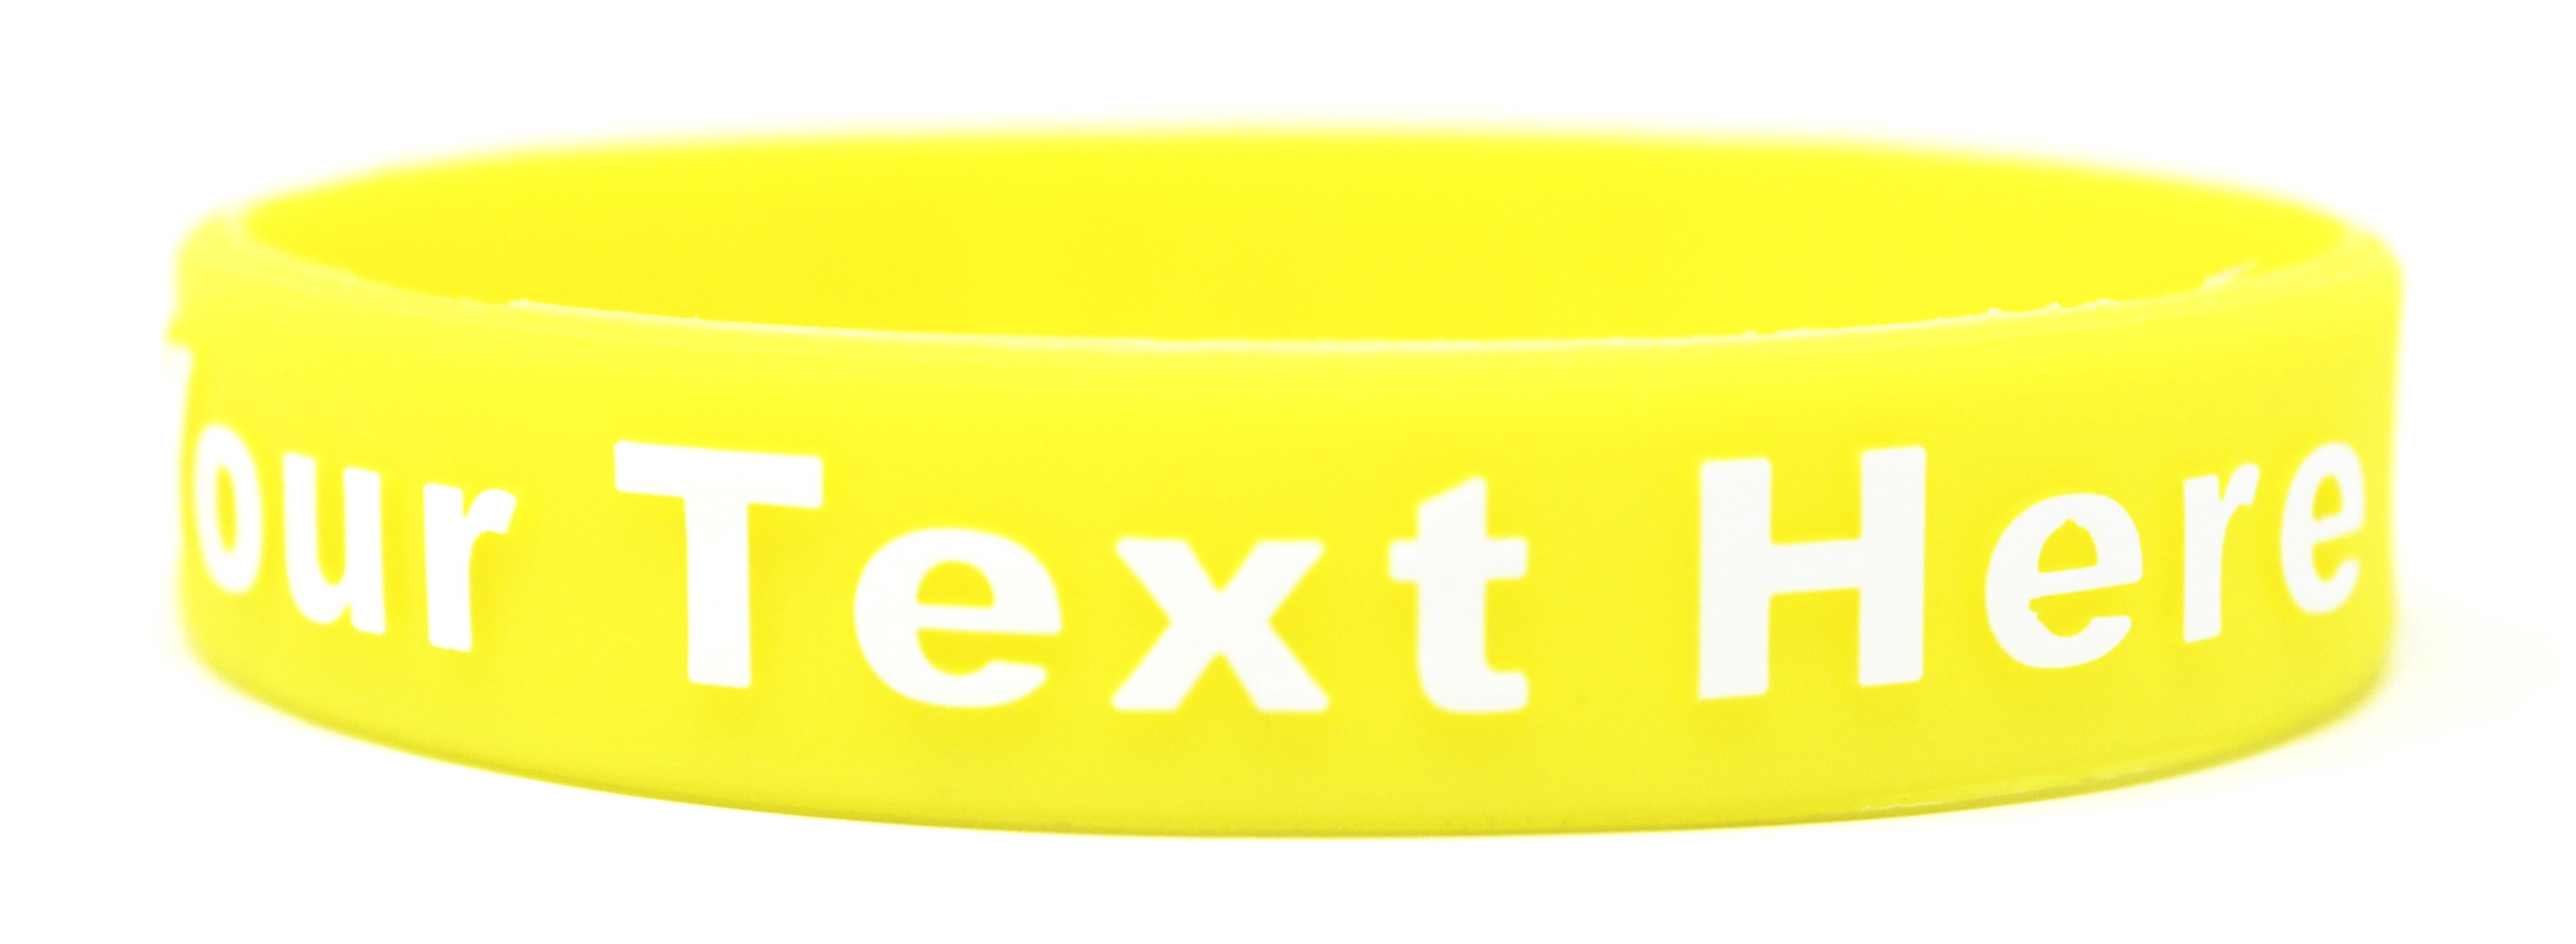 Yellow wristband represents childhood cancer, bone cancer, and more